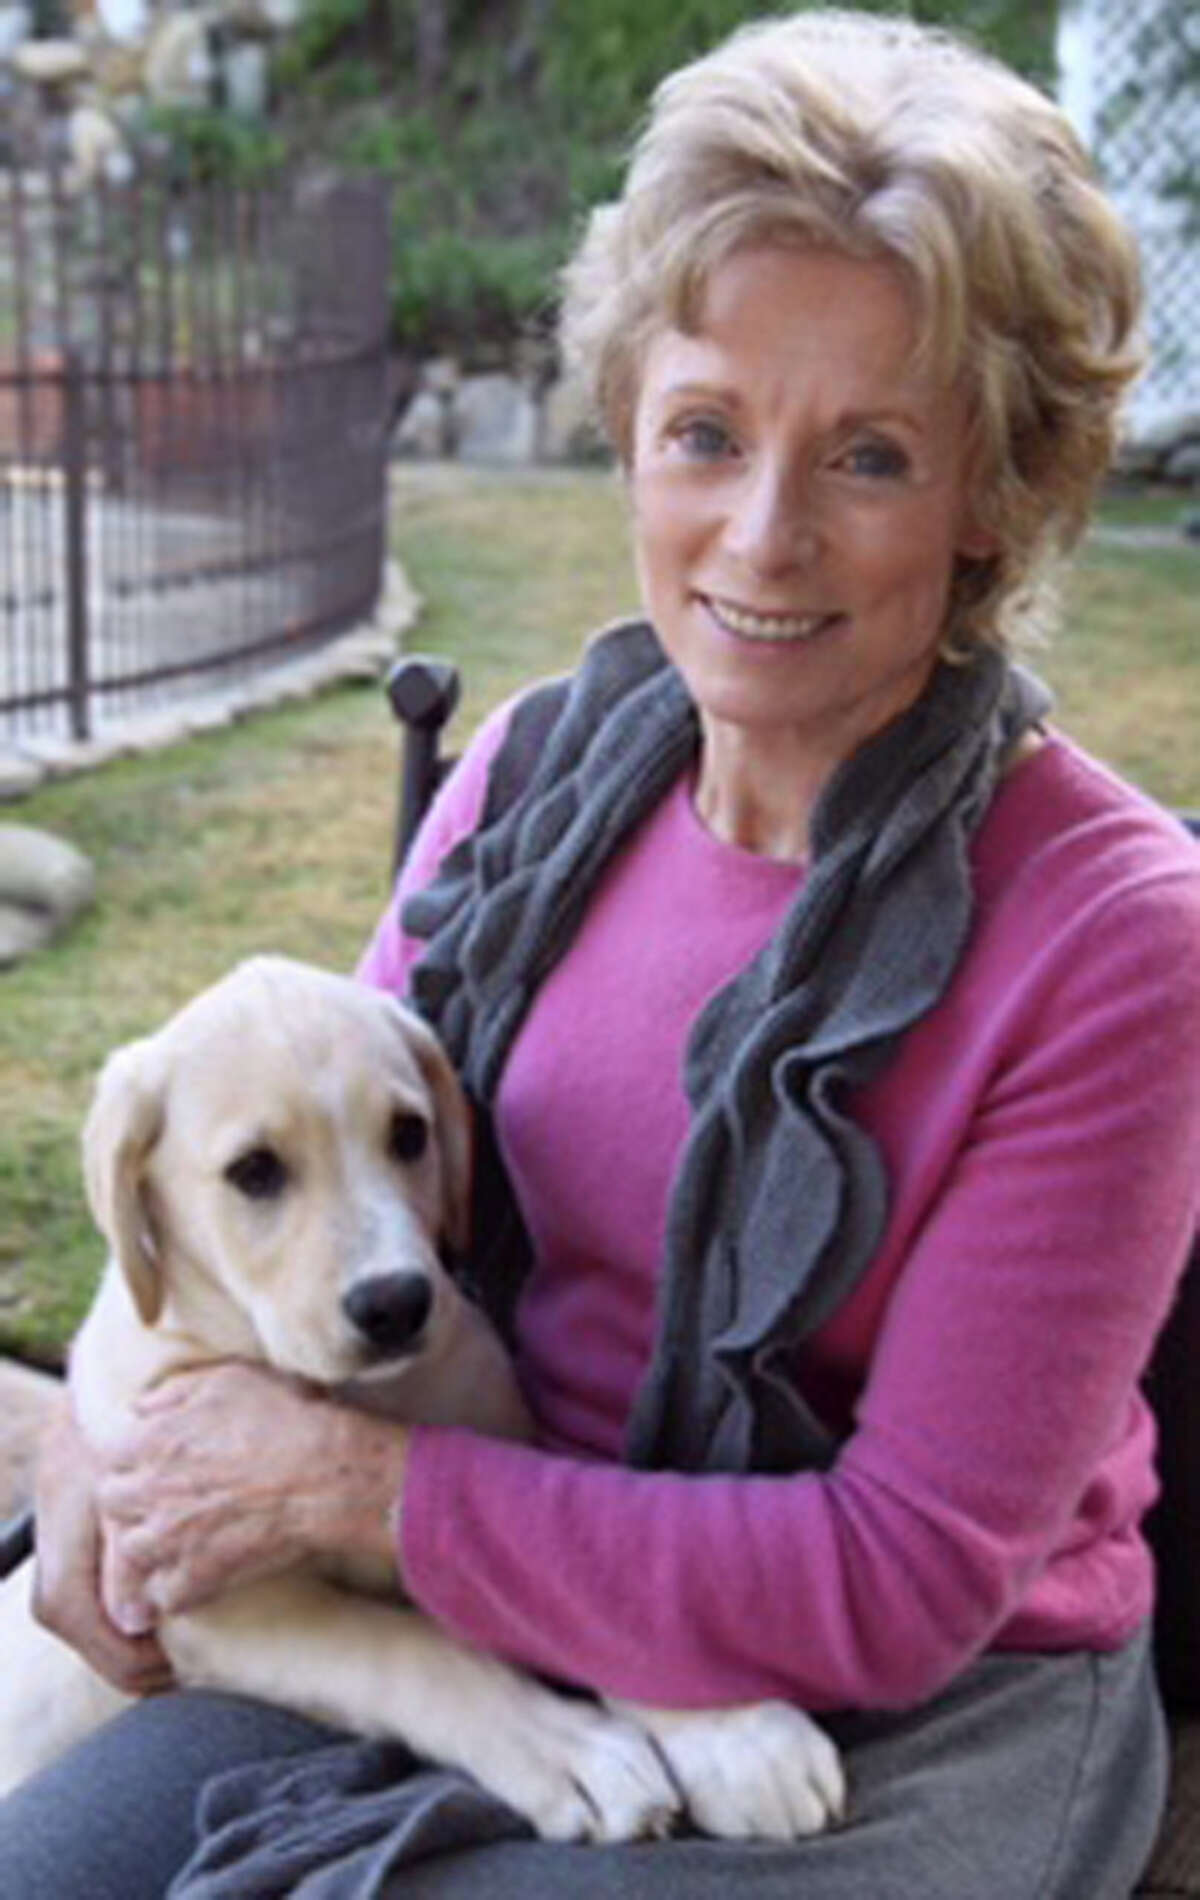 "Sound of Music actress Charmian Carr is seen in an undated photo provided by the Carr family. Carr died Saturday, Sept. 17, 2016, in Woodland Hills, Calif., of complications from a rare form of dementia. Carr was best known for her role as the eldest Von Trapp daughter, Liesl, in the academy award winning movie, The Sound of Music. She was 73. (AP Photo/courtesy of the Carr family) ORG XMIT: NY113